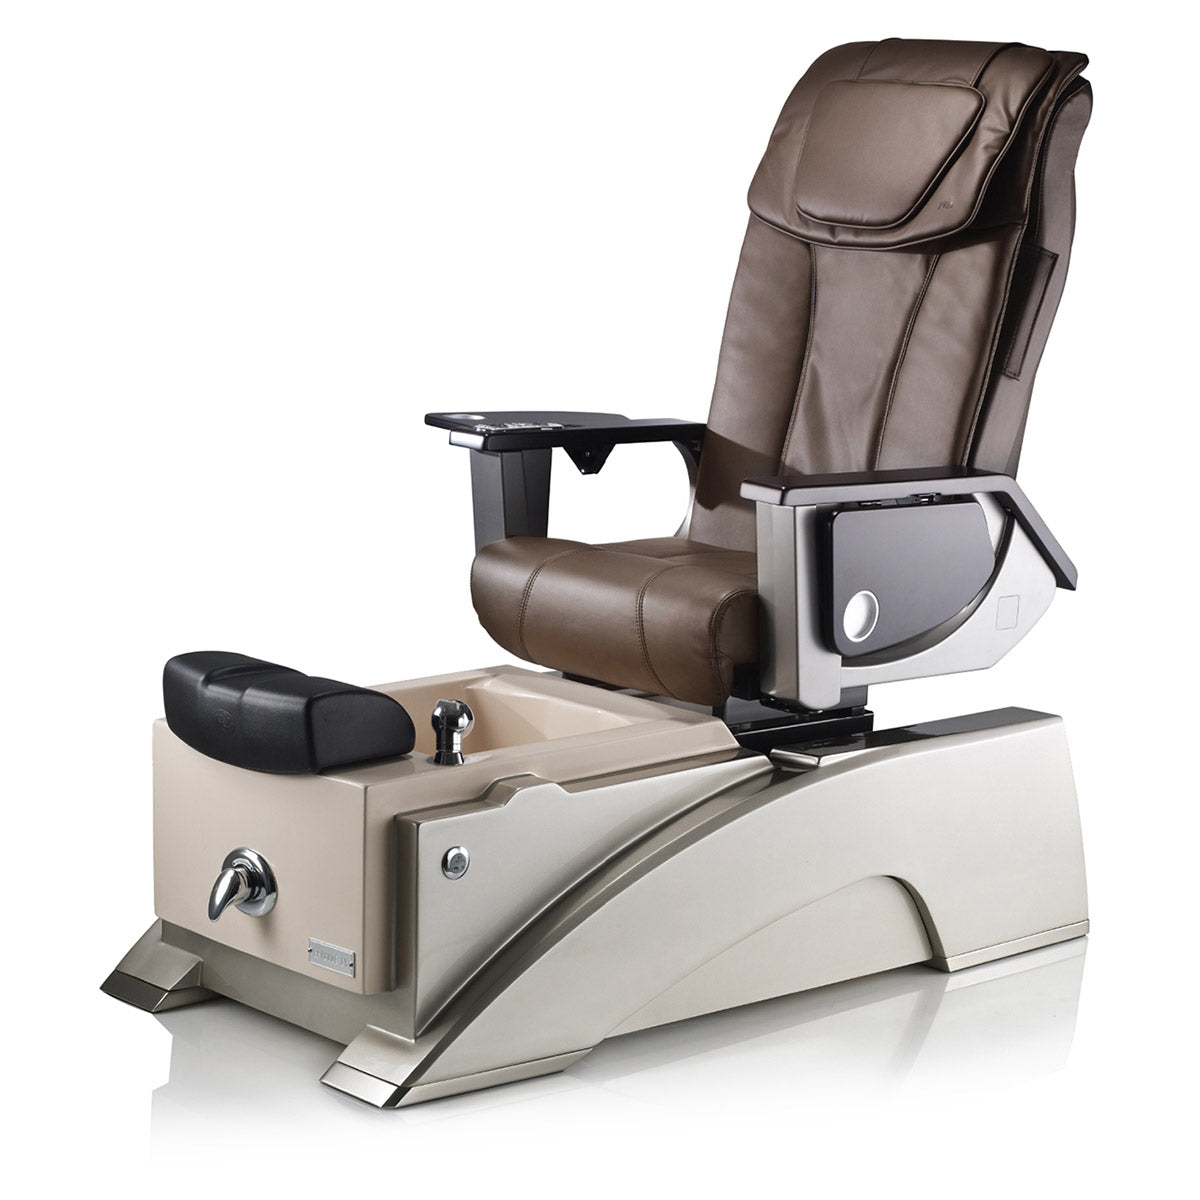 J&A J&A Episode LX Spa Pedicure Chair with LED Base Lighting & Shiatsu Massage Pedicure & Spa Chairs - ChairsThatGive